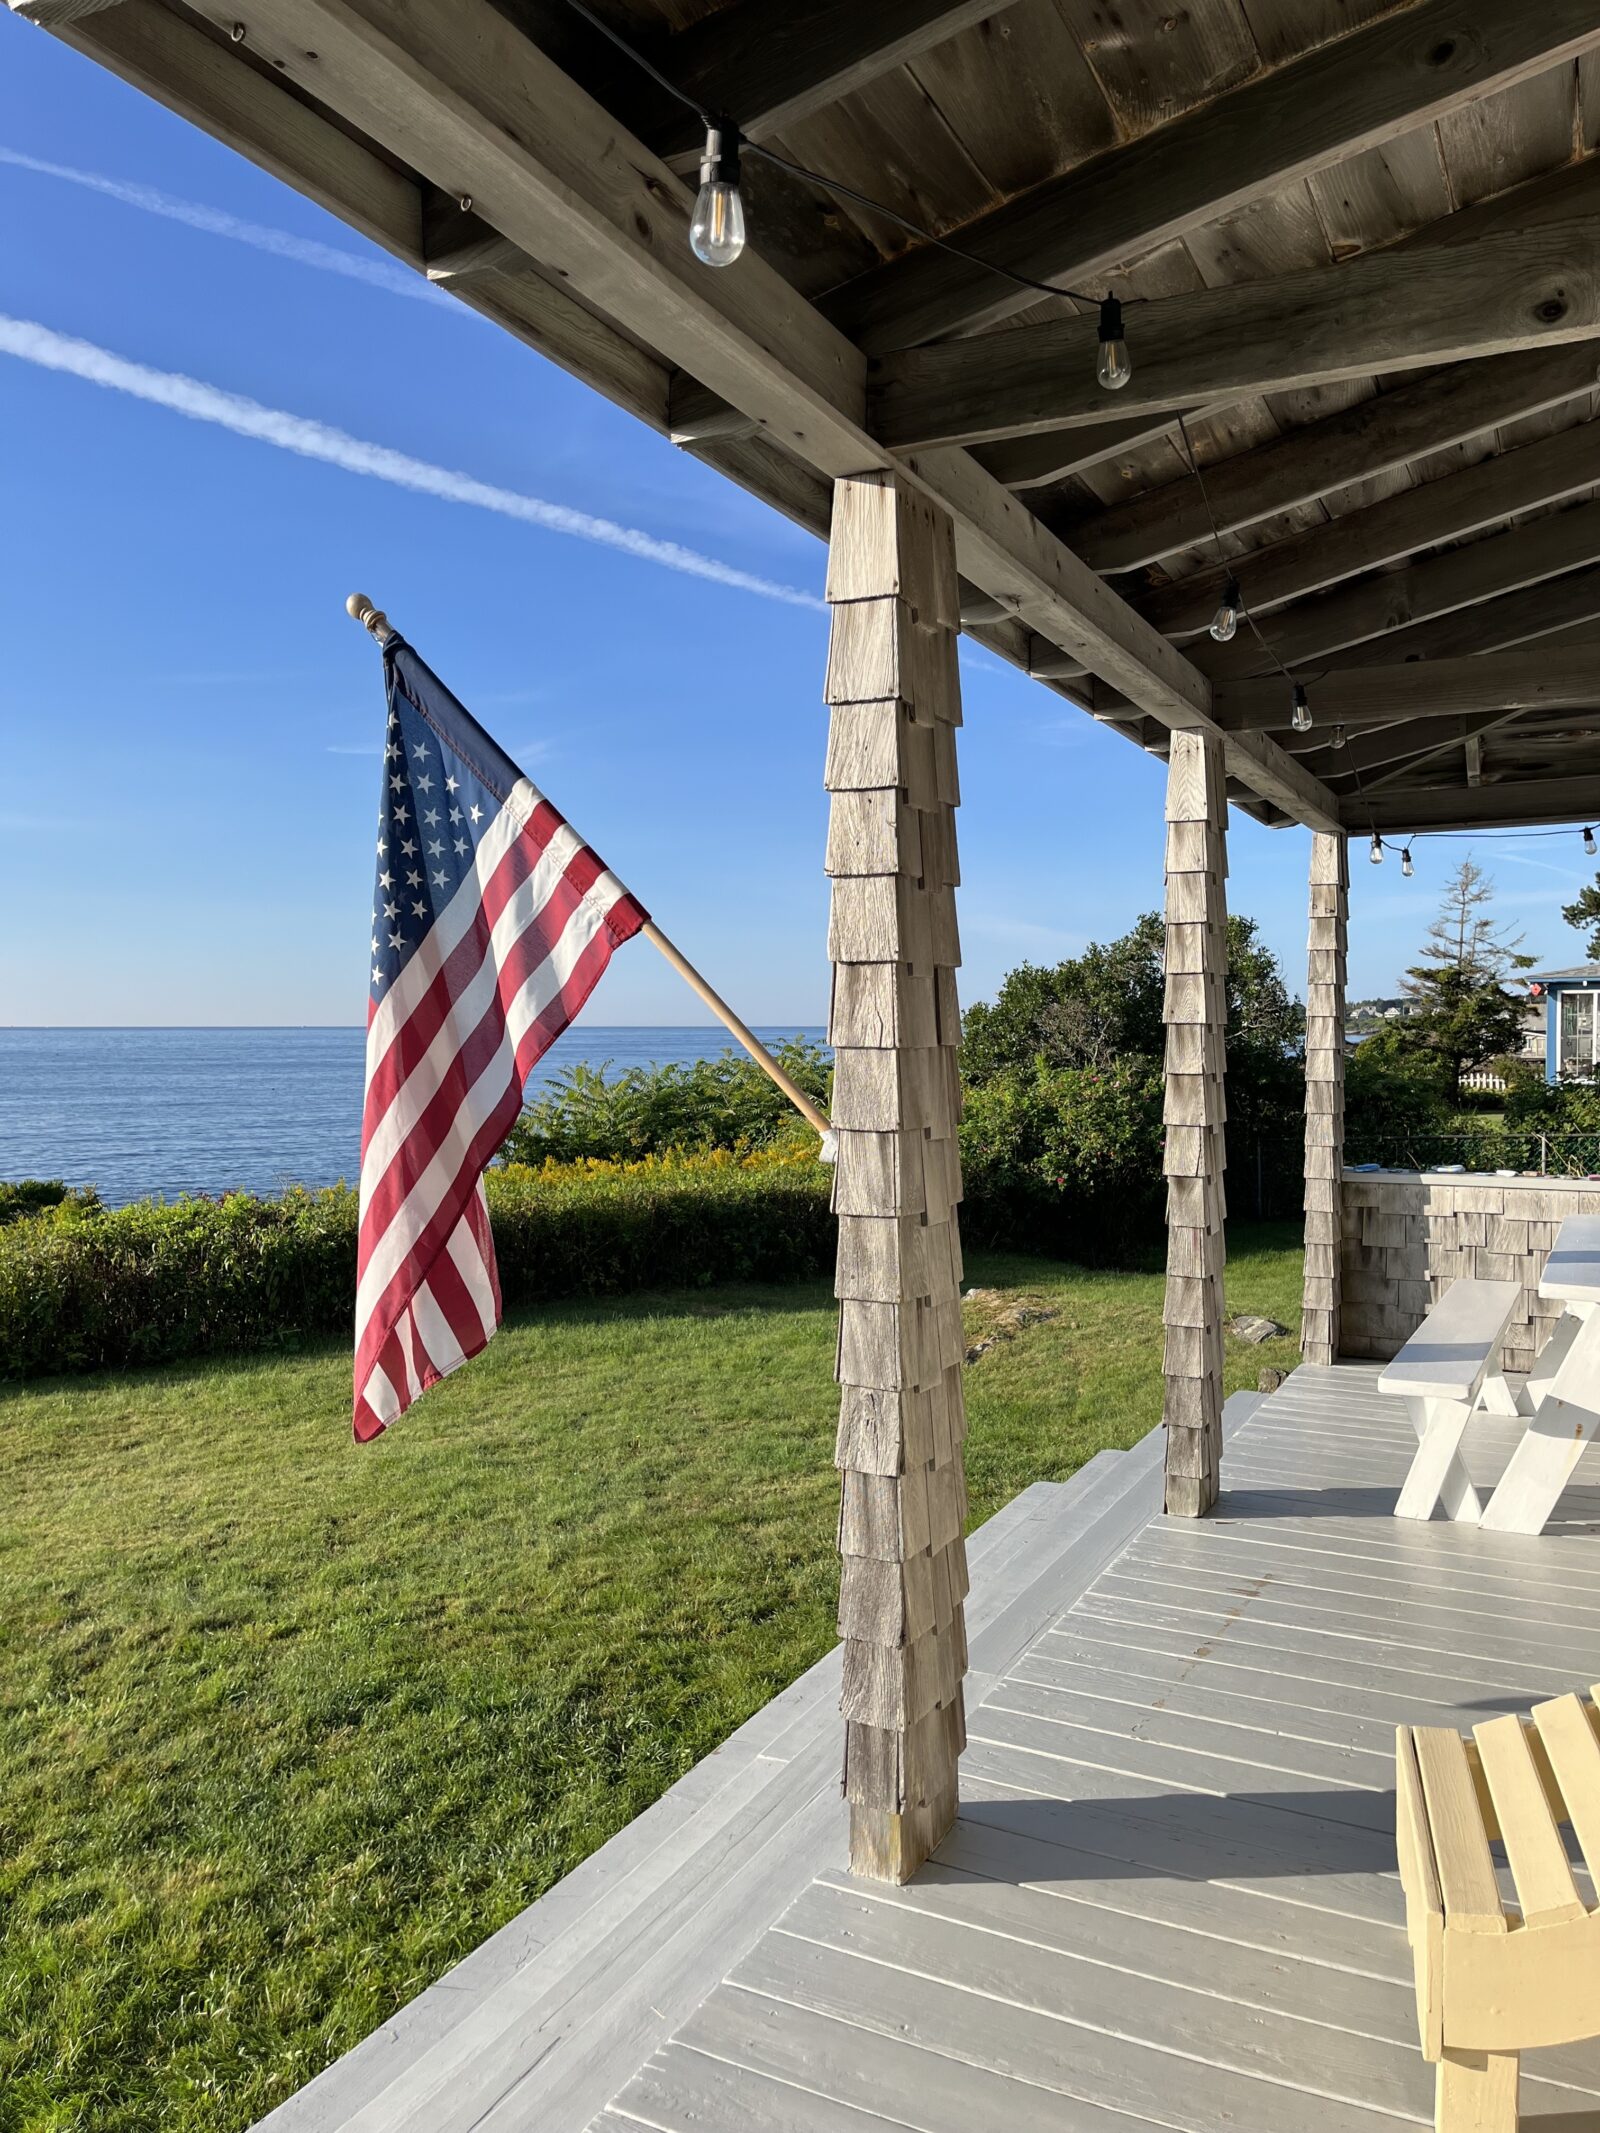 A wooden porch with shingled pillars overlooks a grassy yard and a calm sea under a clear blue sky. An American flag hangs from one of the pillars. The porch is partially shaded under the roof, with string lights hanging above.